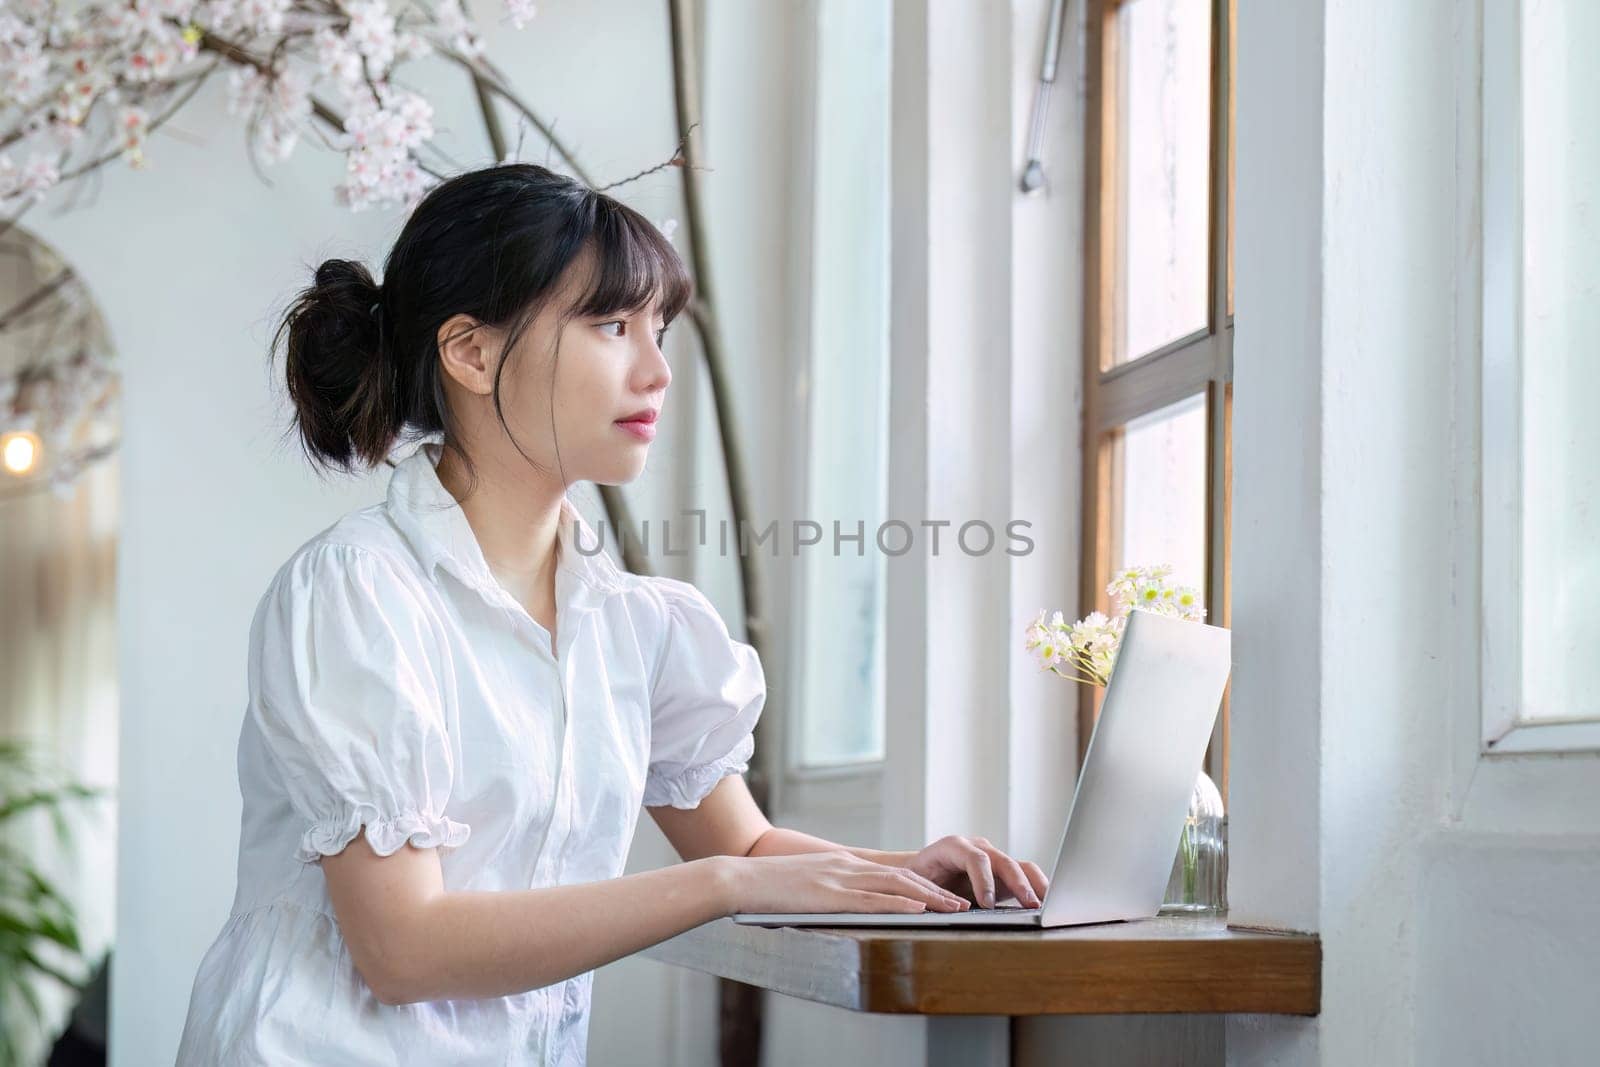 Asian female student studying online in living room with laptop doing online research for a class subject Make notes for essay homework. online education concept.